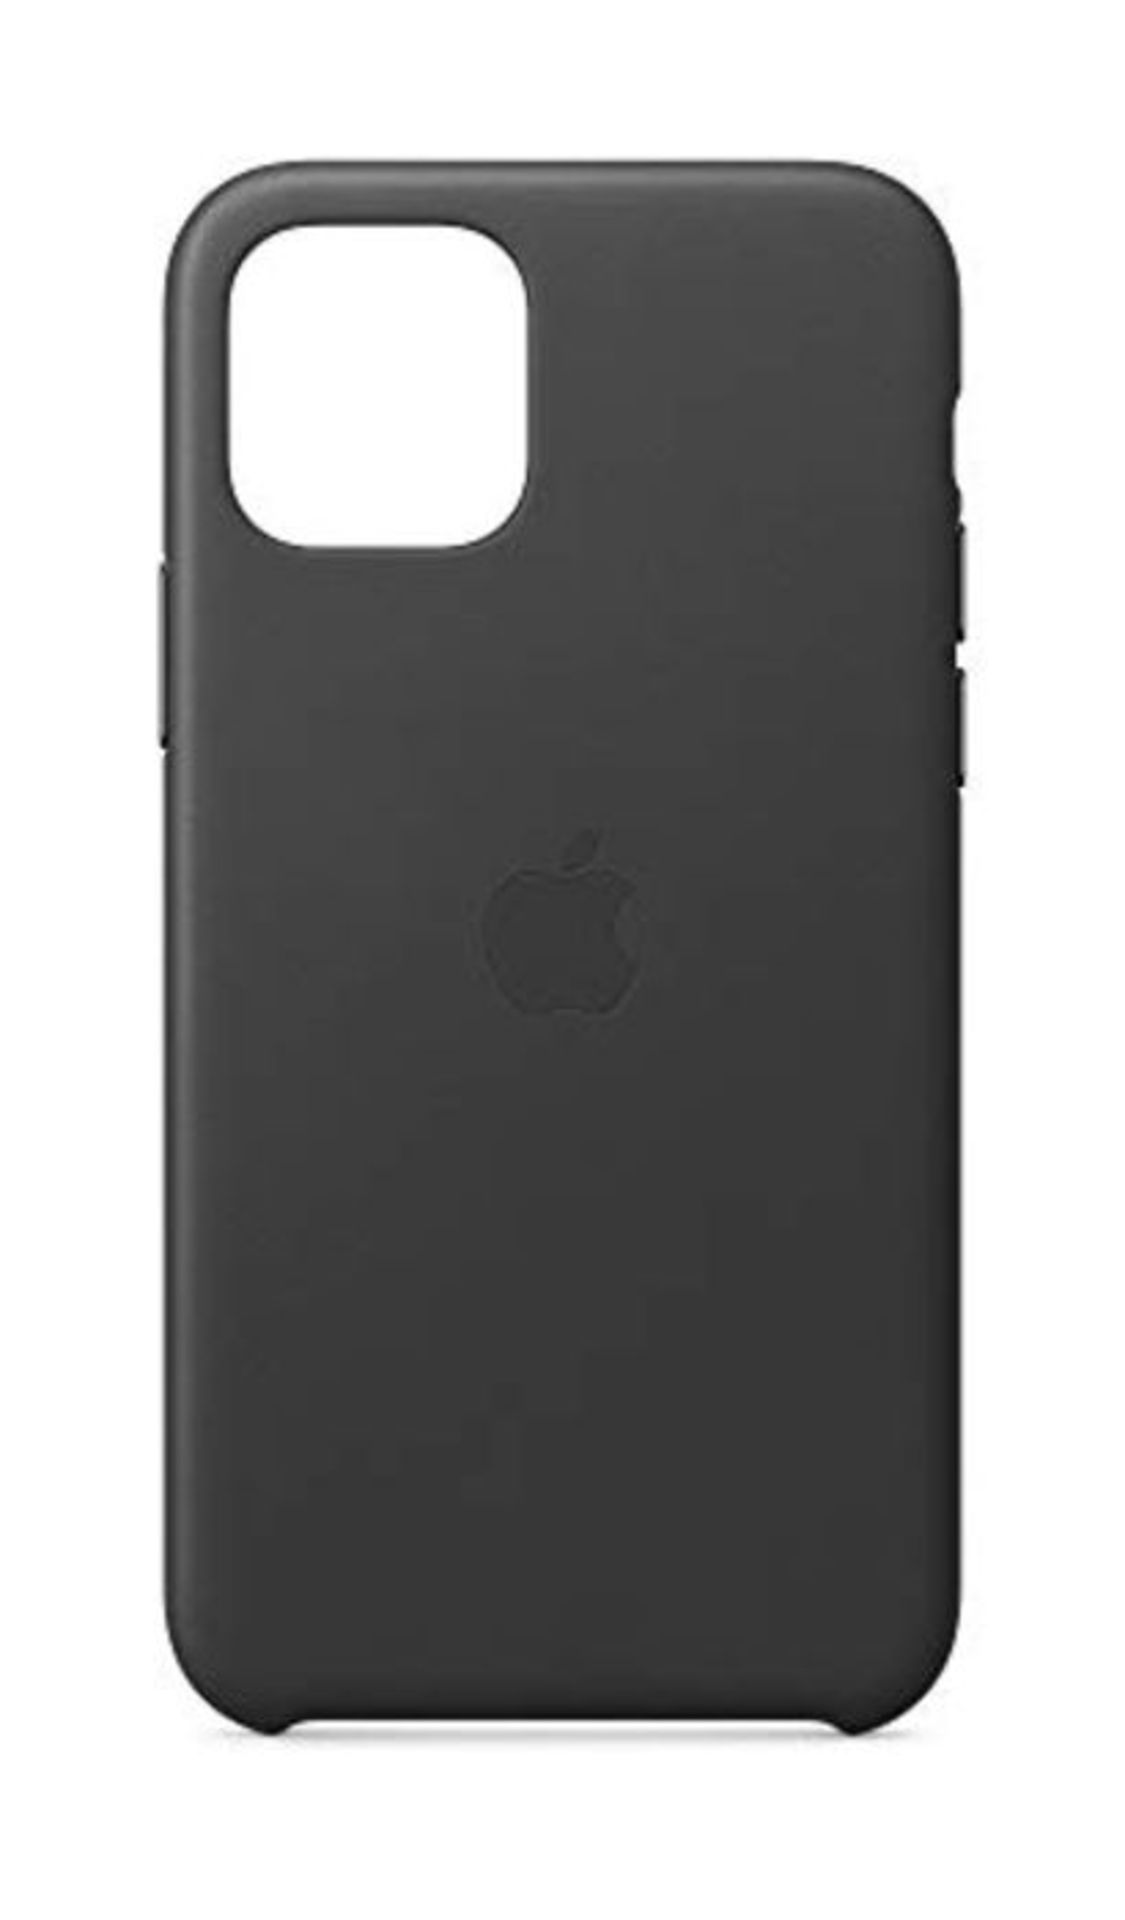 Apple Leather Case (for iPhone 11 Pro) - Black - Image 7 of 9